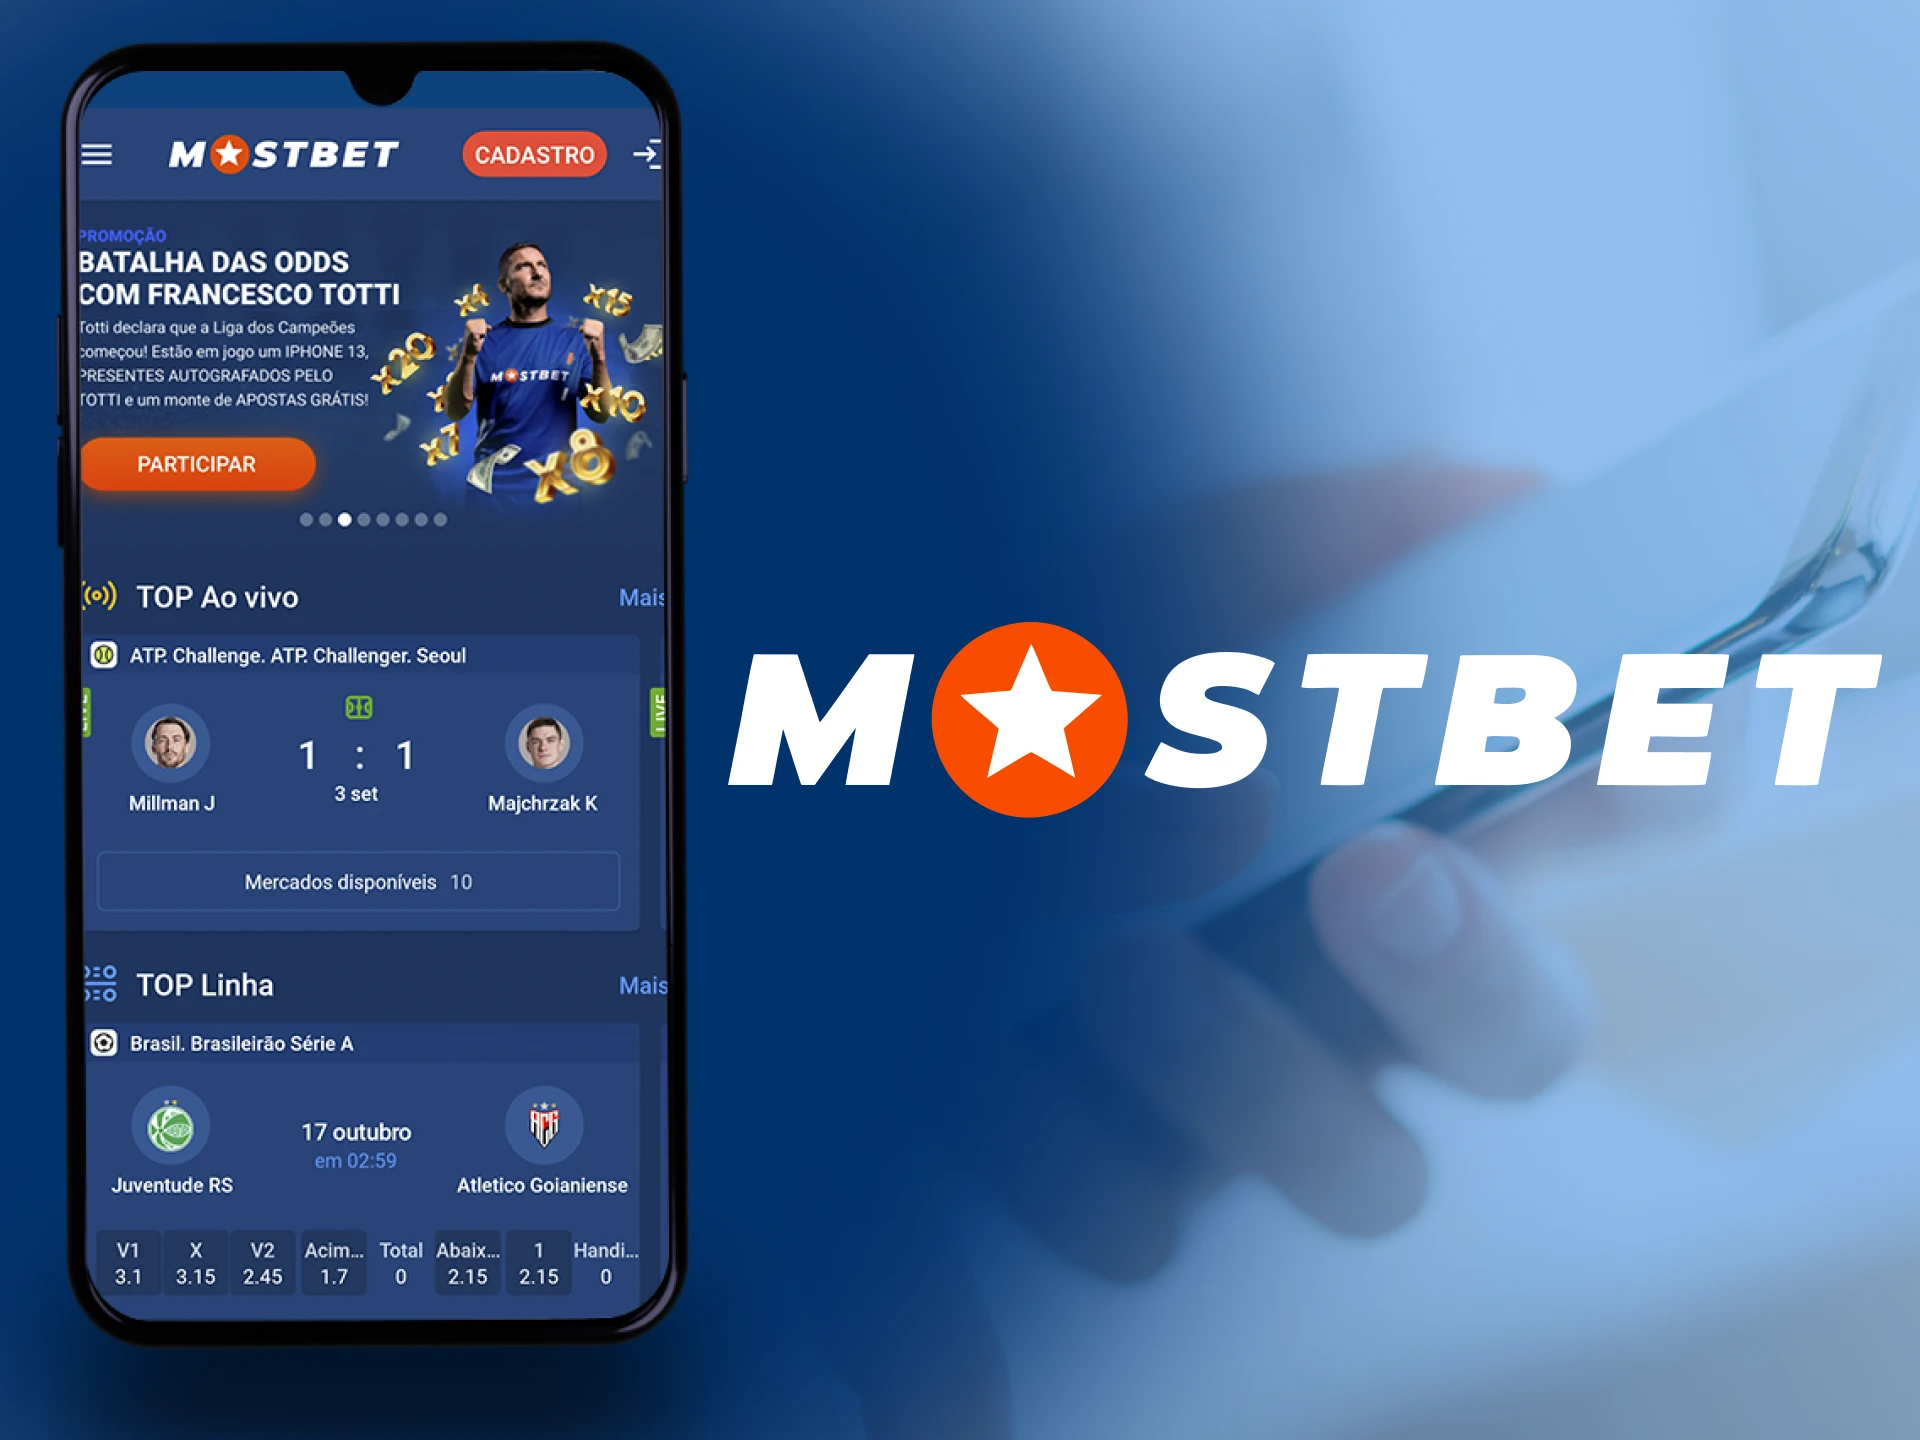 Mostbet supports all Android devices with suitable system requirements.